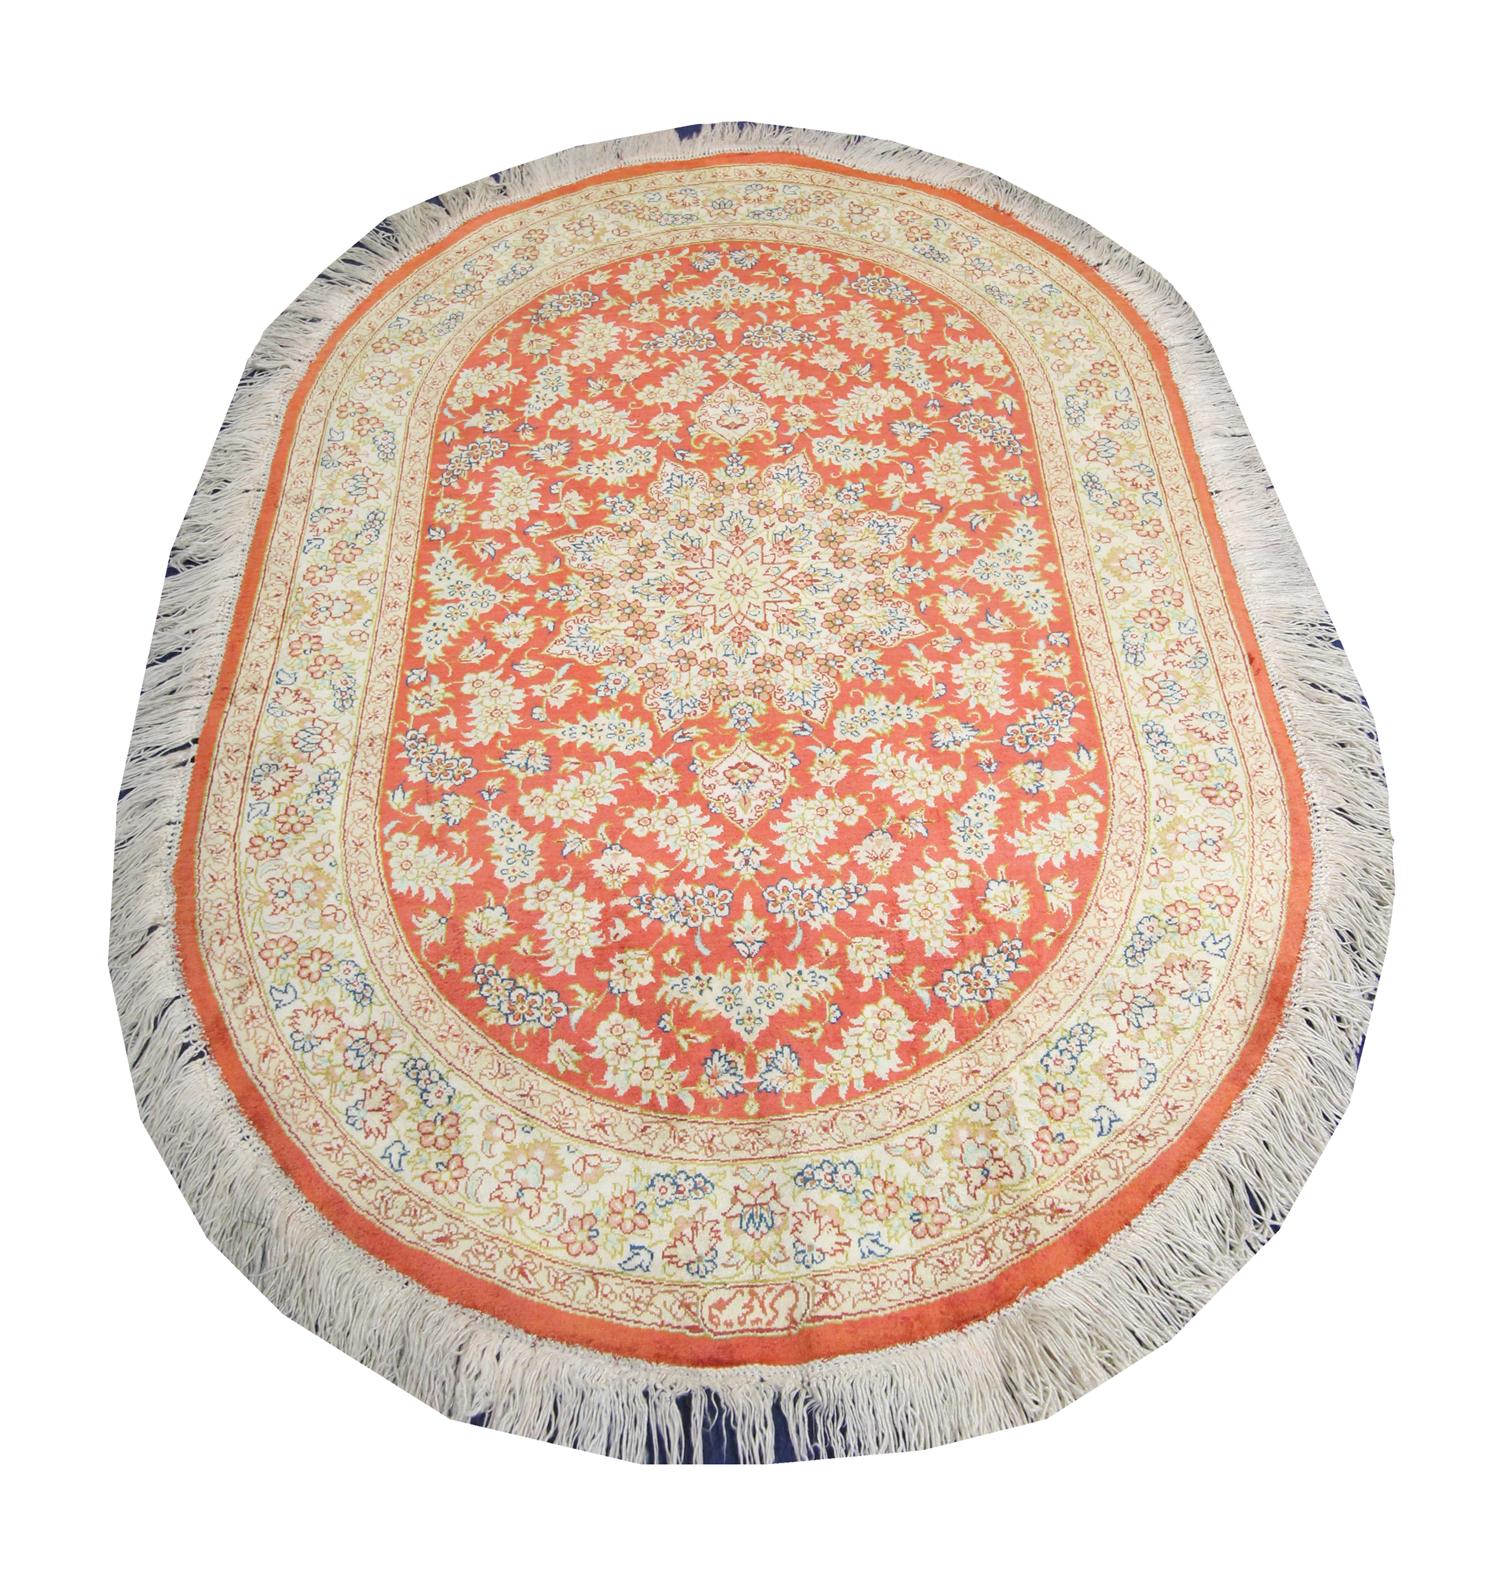 This fine pue silk rug was woven by hand in Turkey in the 1990s. It features a rich red-orange background with cream and beige accents that make up the symmetrical oriental medallion design. Decorated with delicate floral patterns. The unique colour